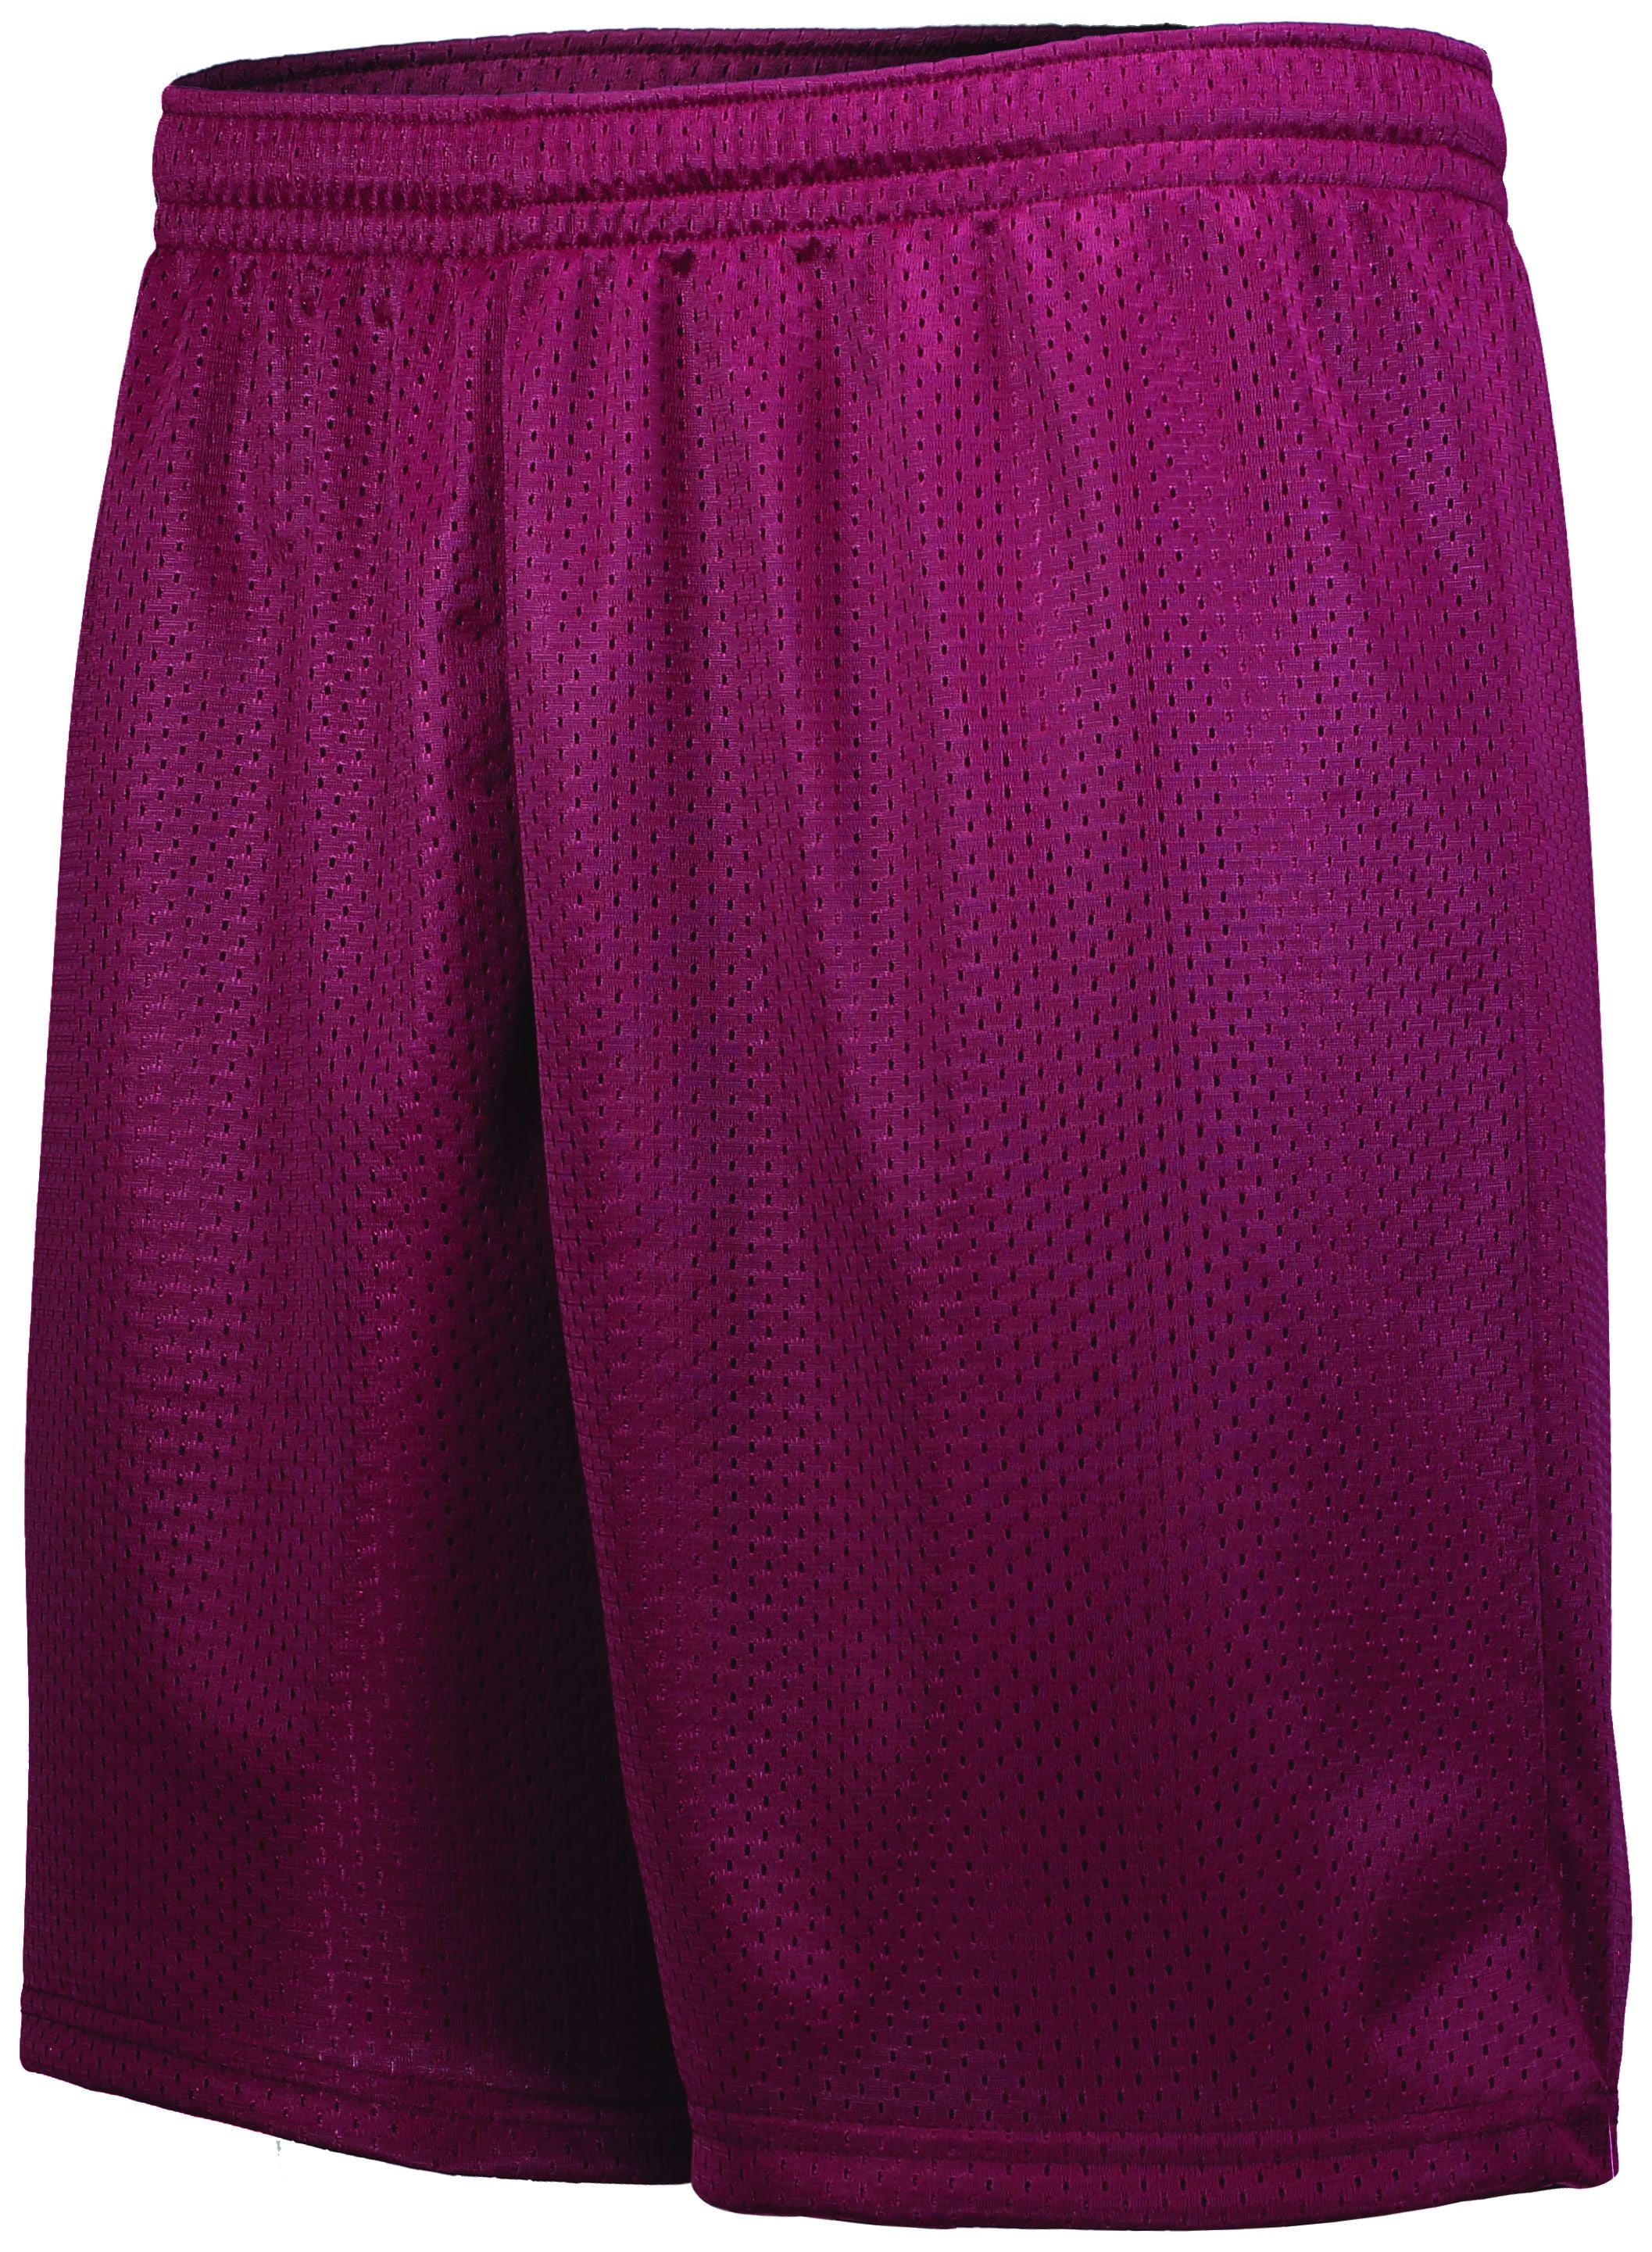 Augusta Sportswear Tricot Mesh Shorts in Maroon (Hlw)  -Part of the Adult, Adult-Shorts, Augusta-Products product lines at KanaleyCreations.com